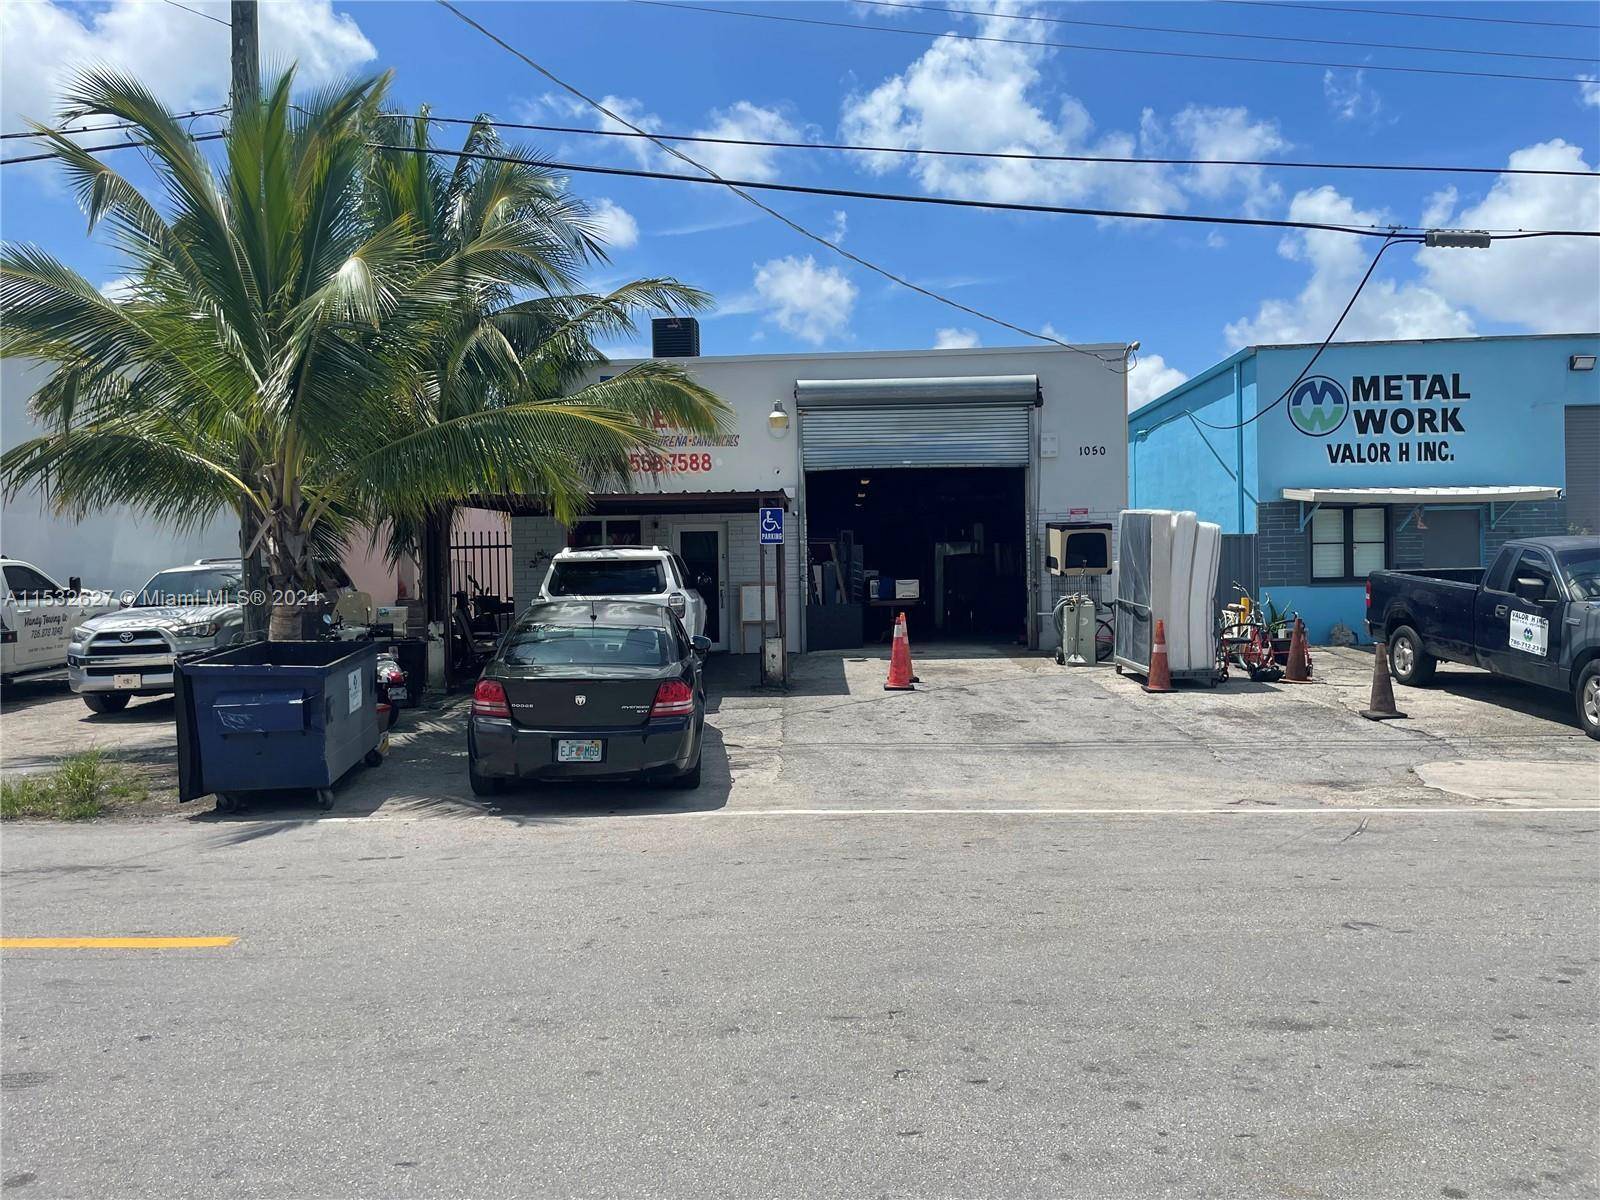 This prime freestanding property is located in Hialeah, Florida and features 4, 125 SF of warehouse space, Street Level loading, and great access to major thoroughfares.